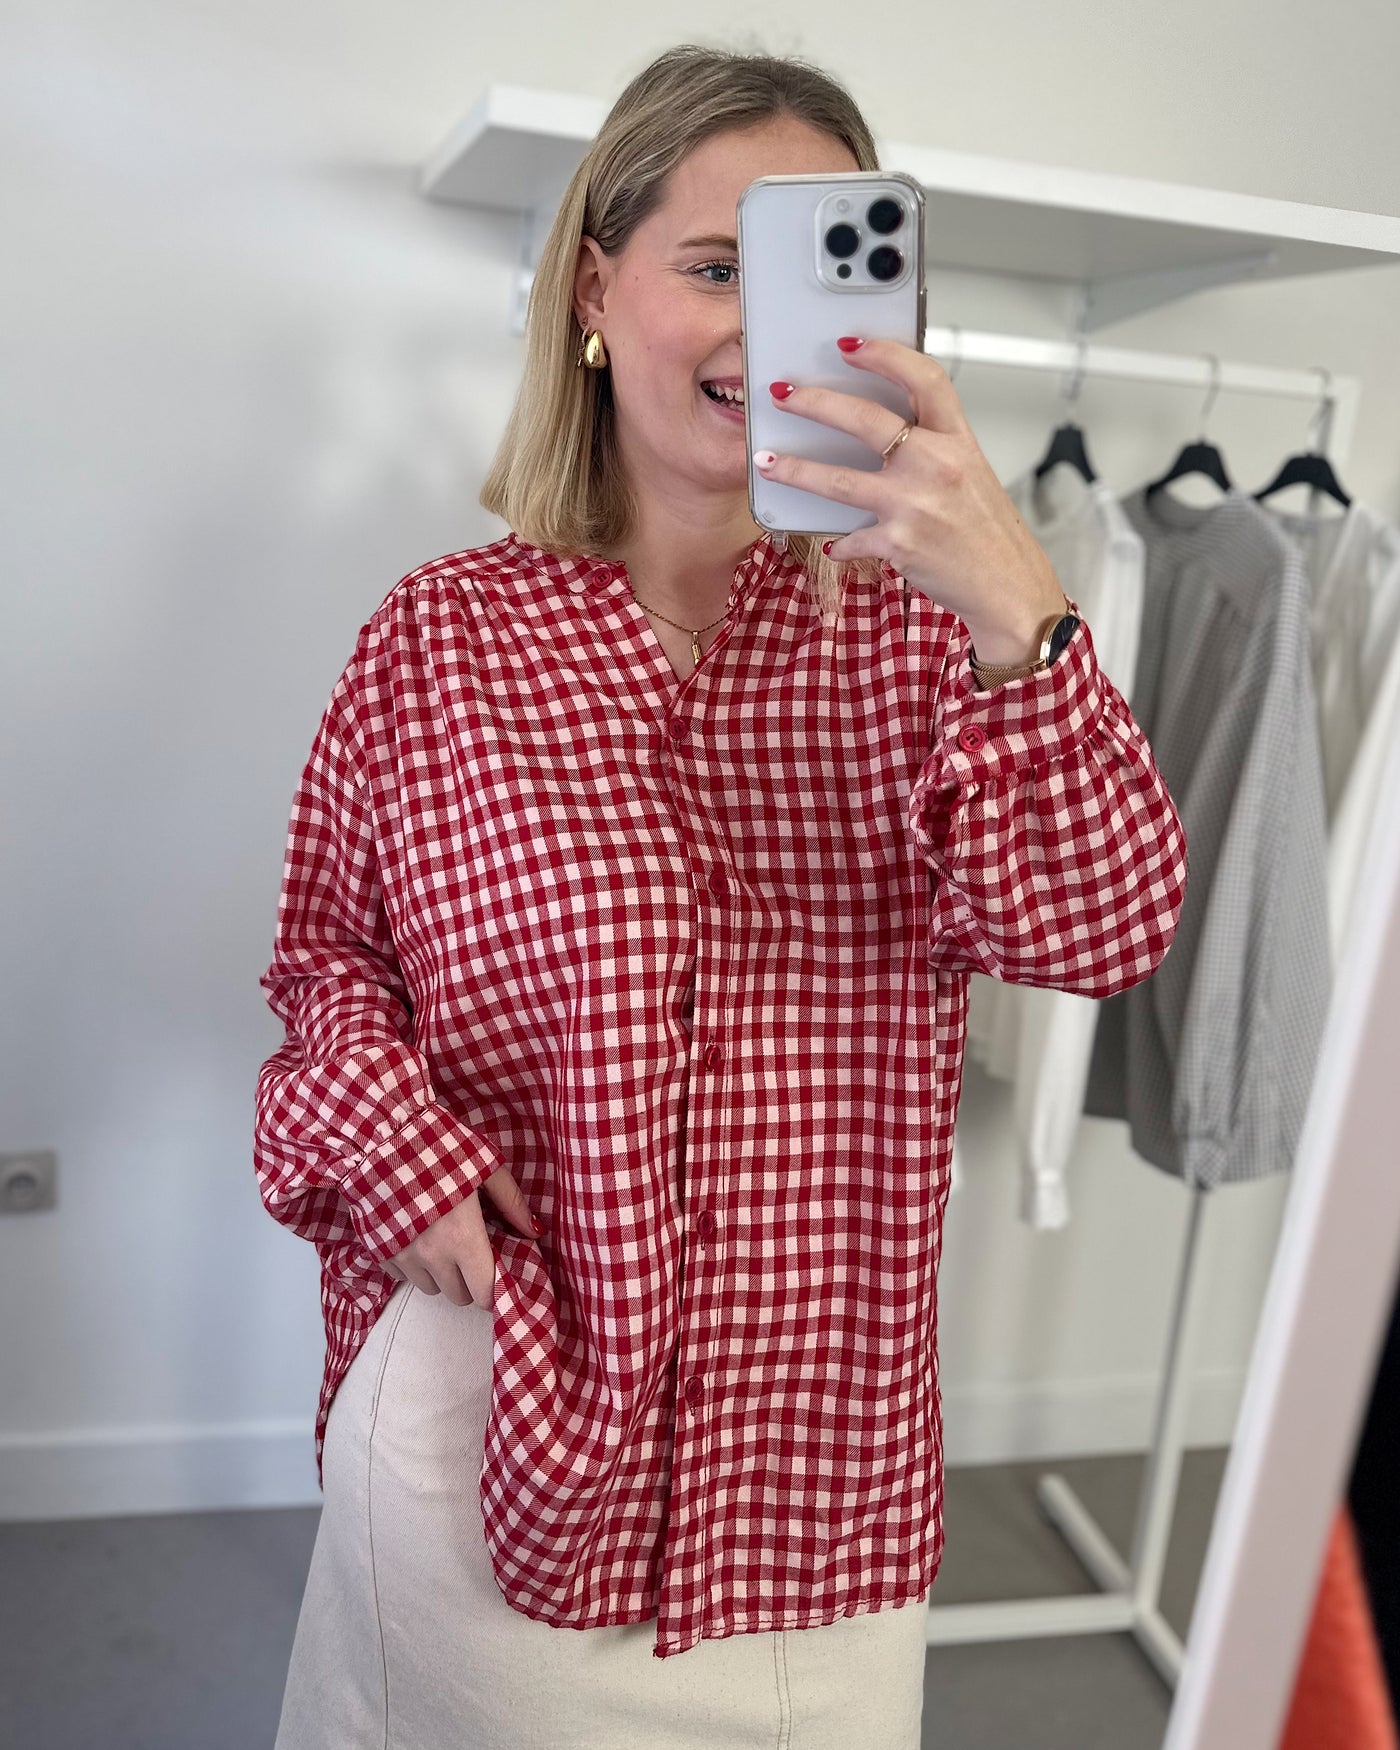 Gingnam Blouse Checked Red